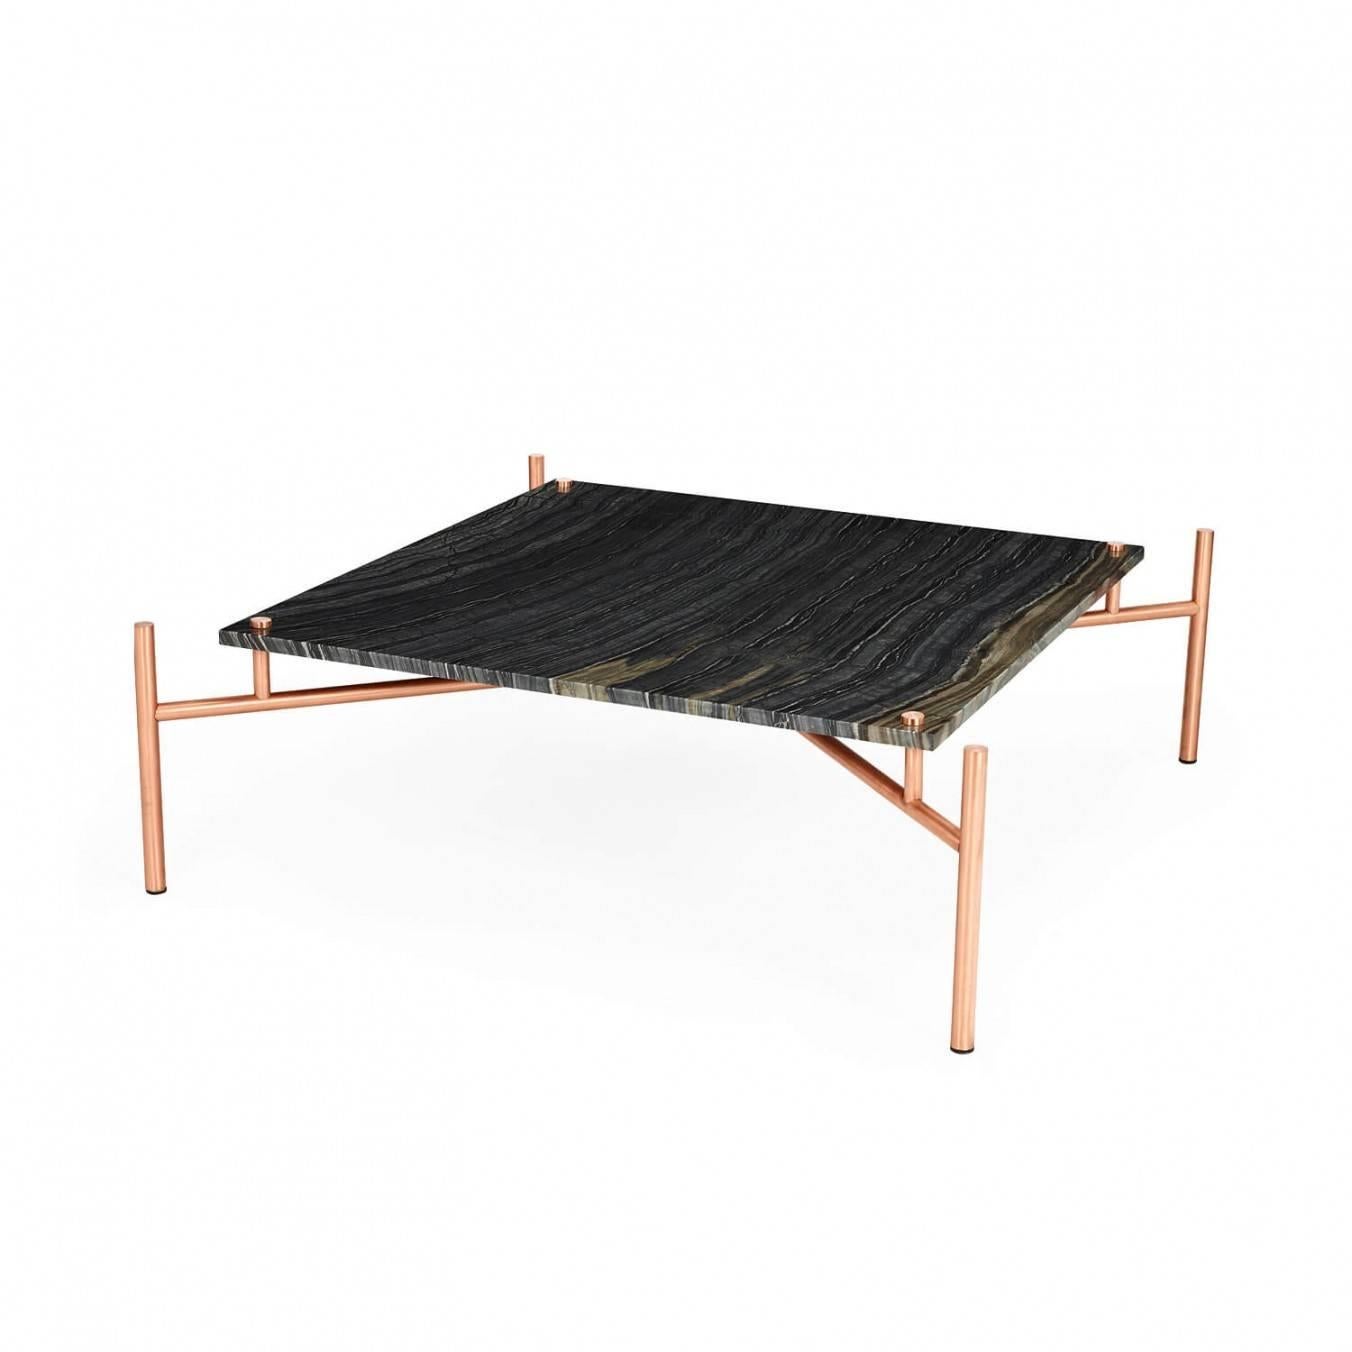 Marble coffee table with copper legs.